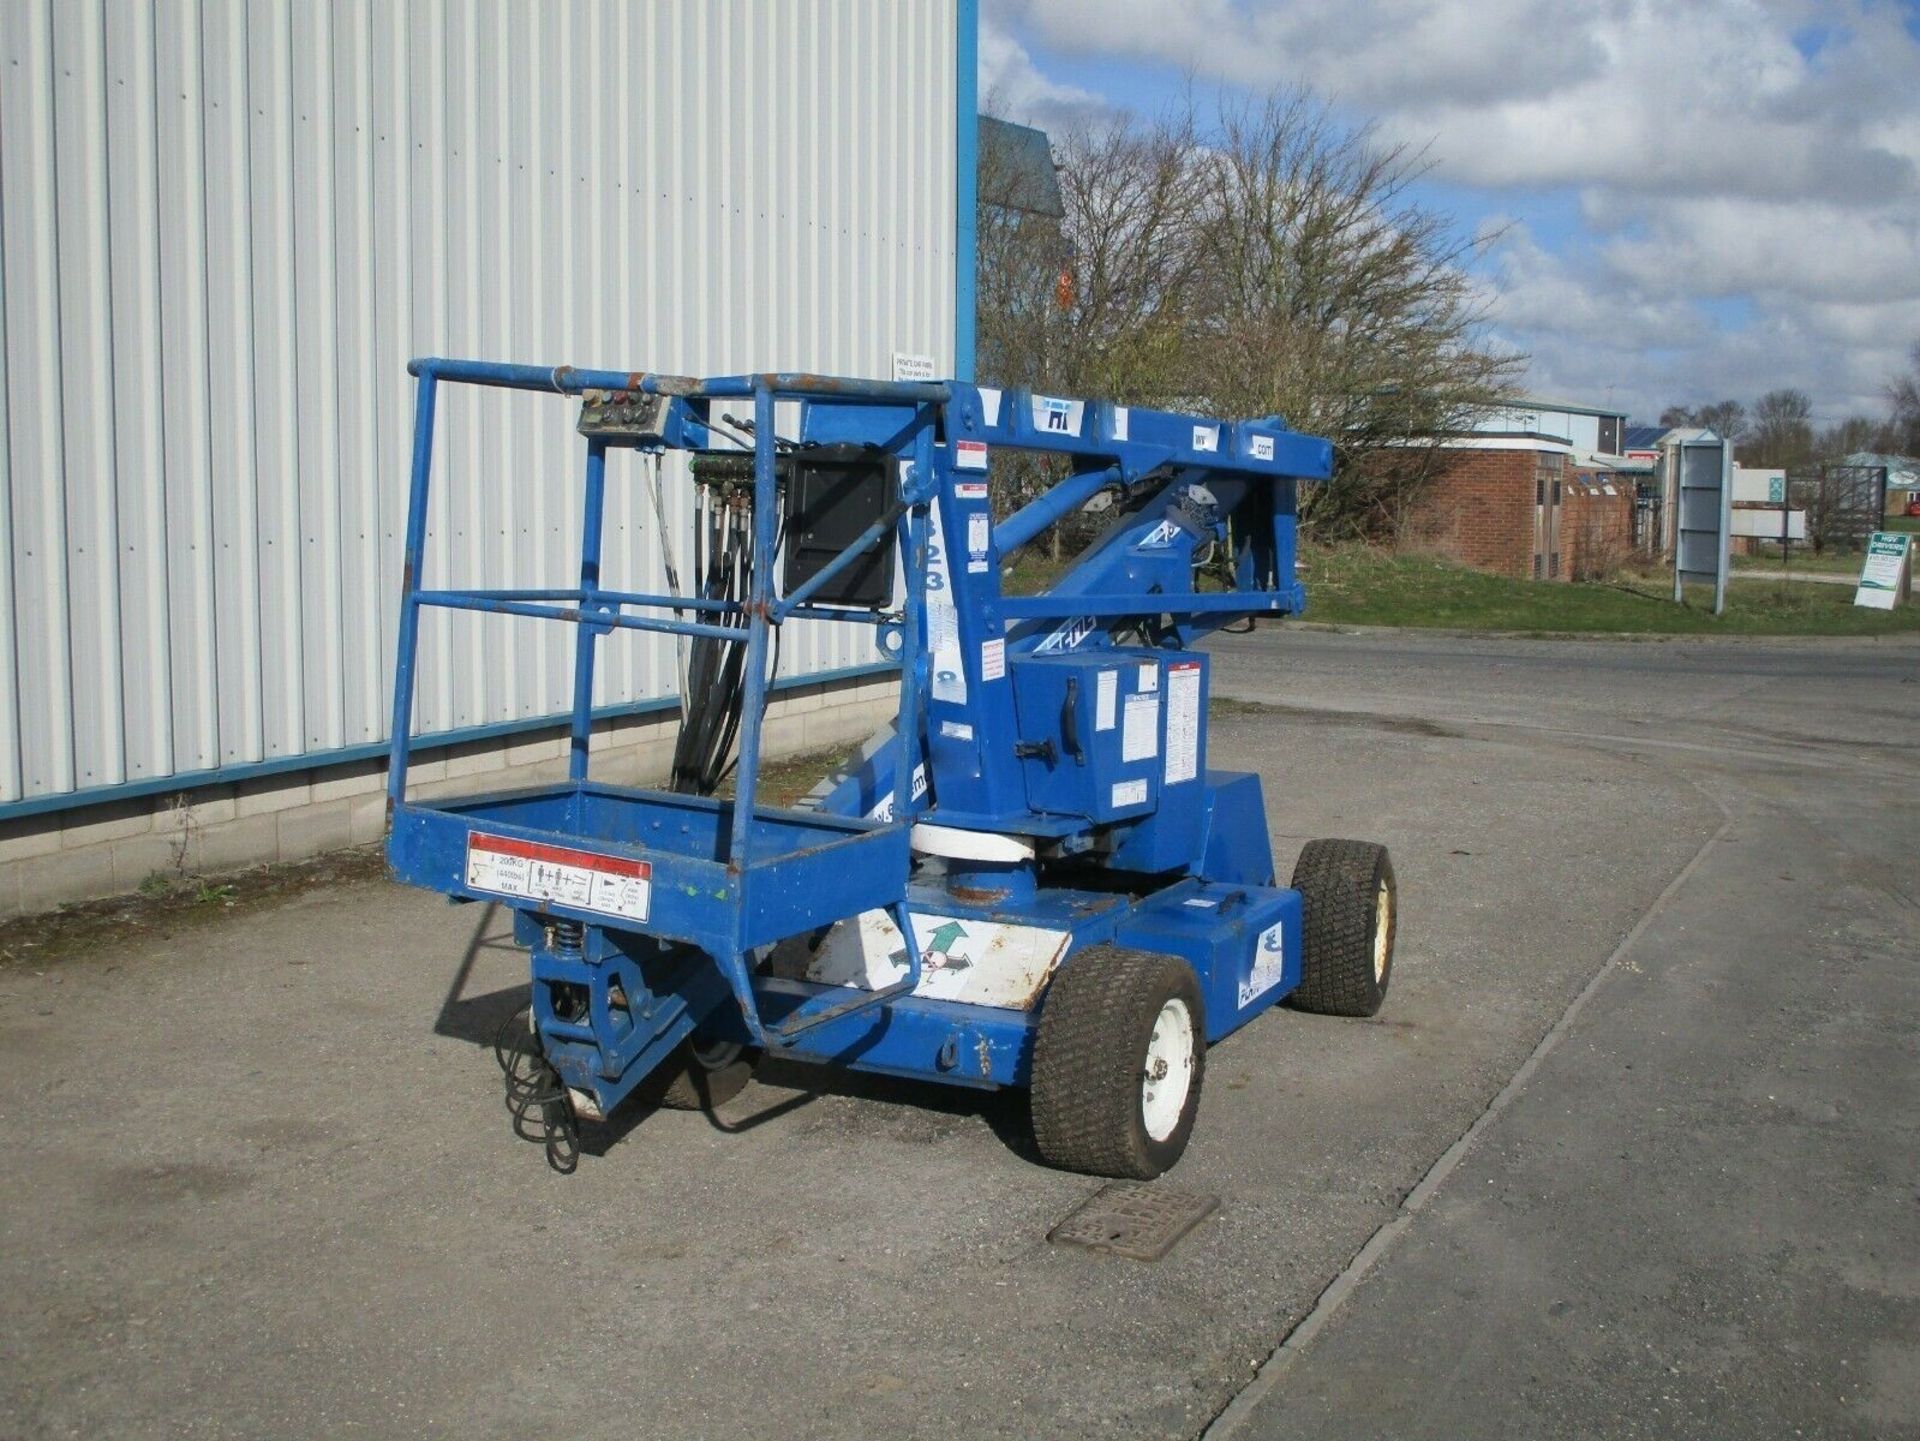 Nifty lift HR12 Self Propelled Access Platform - Image 2 of 7